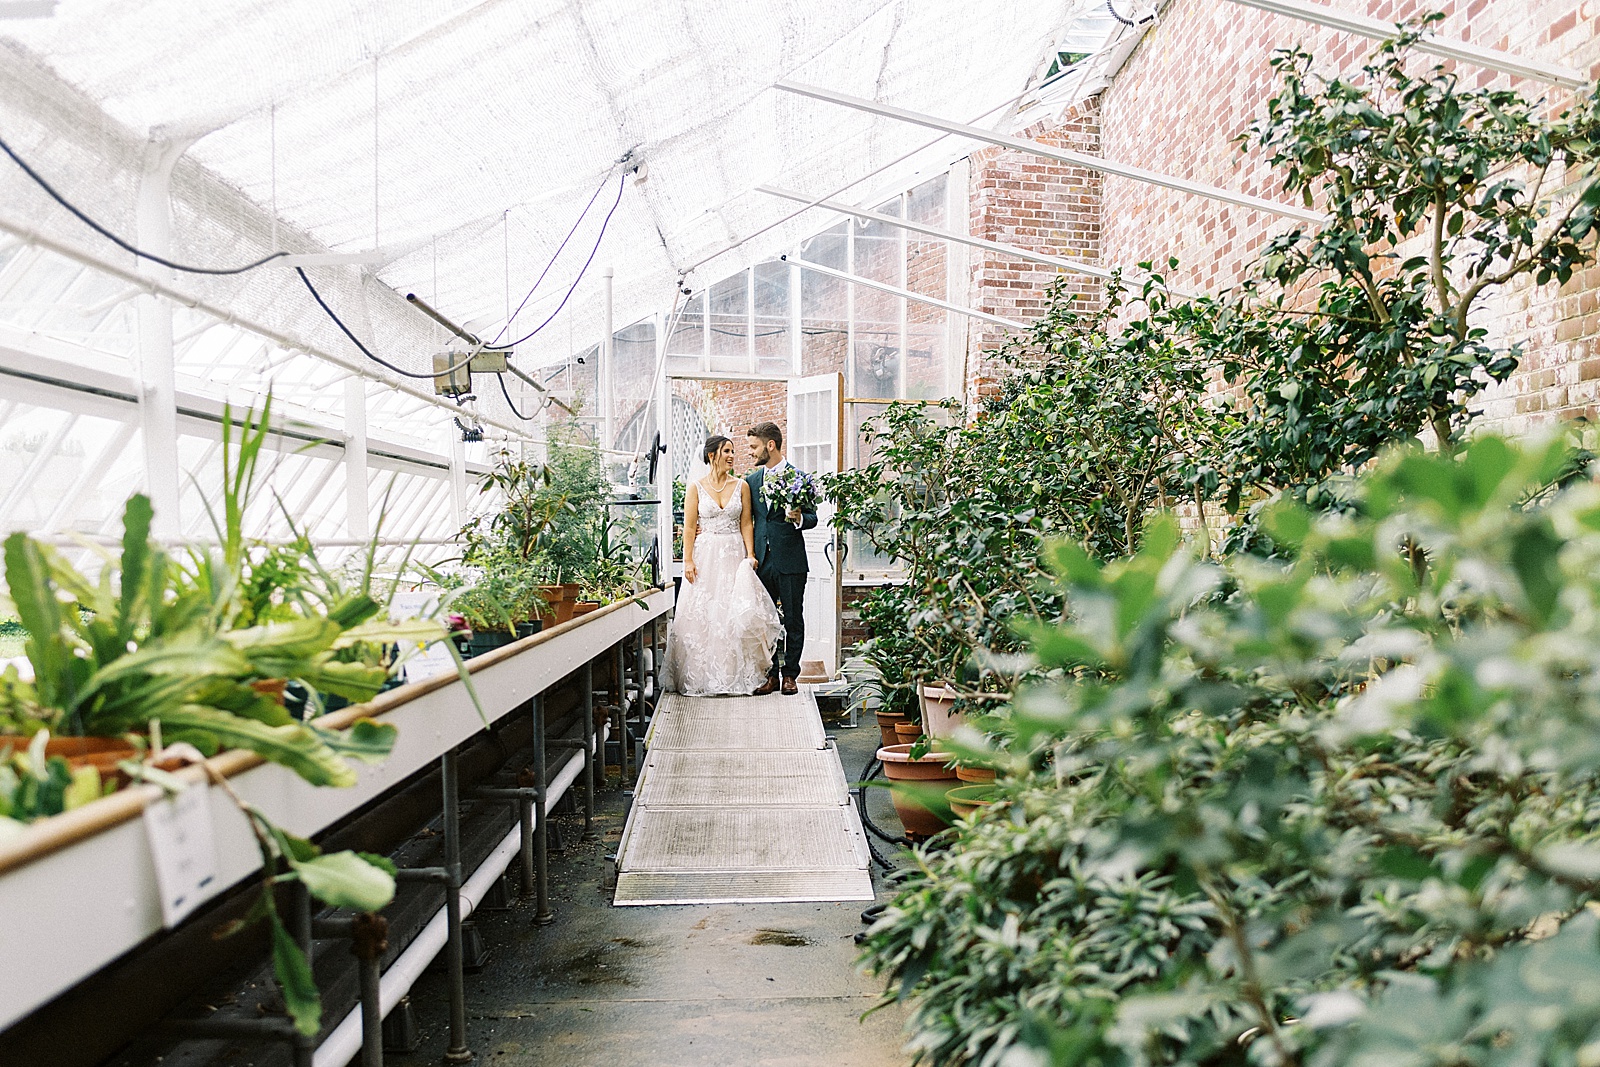 Bride and groom walking into a greenhouse together. 